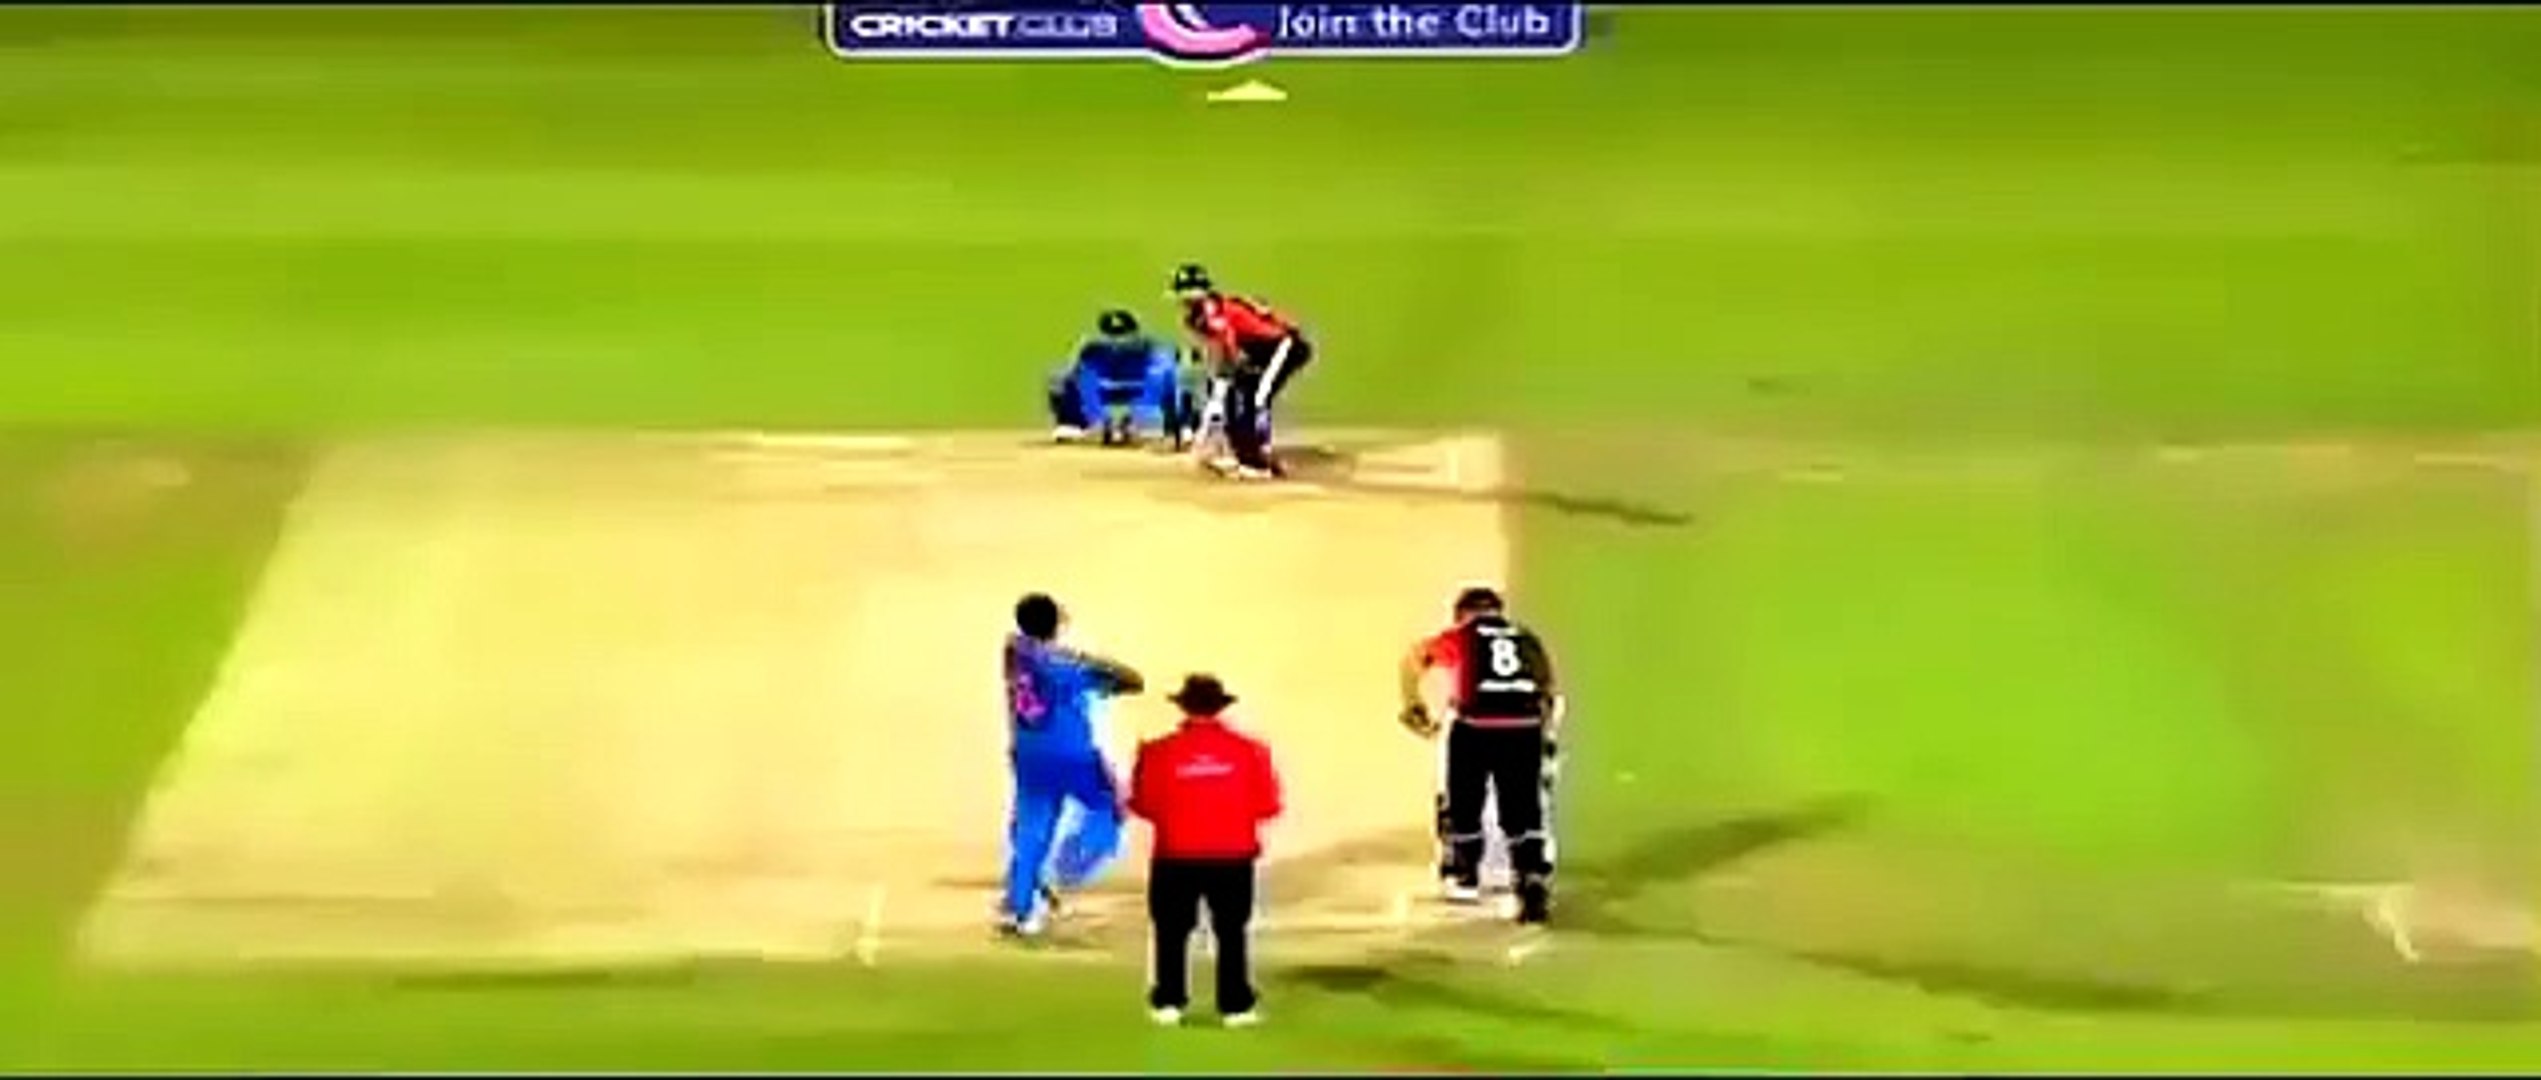 MS Dhoni - Fastest stumping Ever in Cricket History )